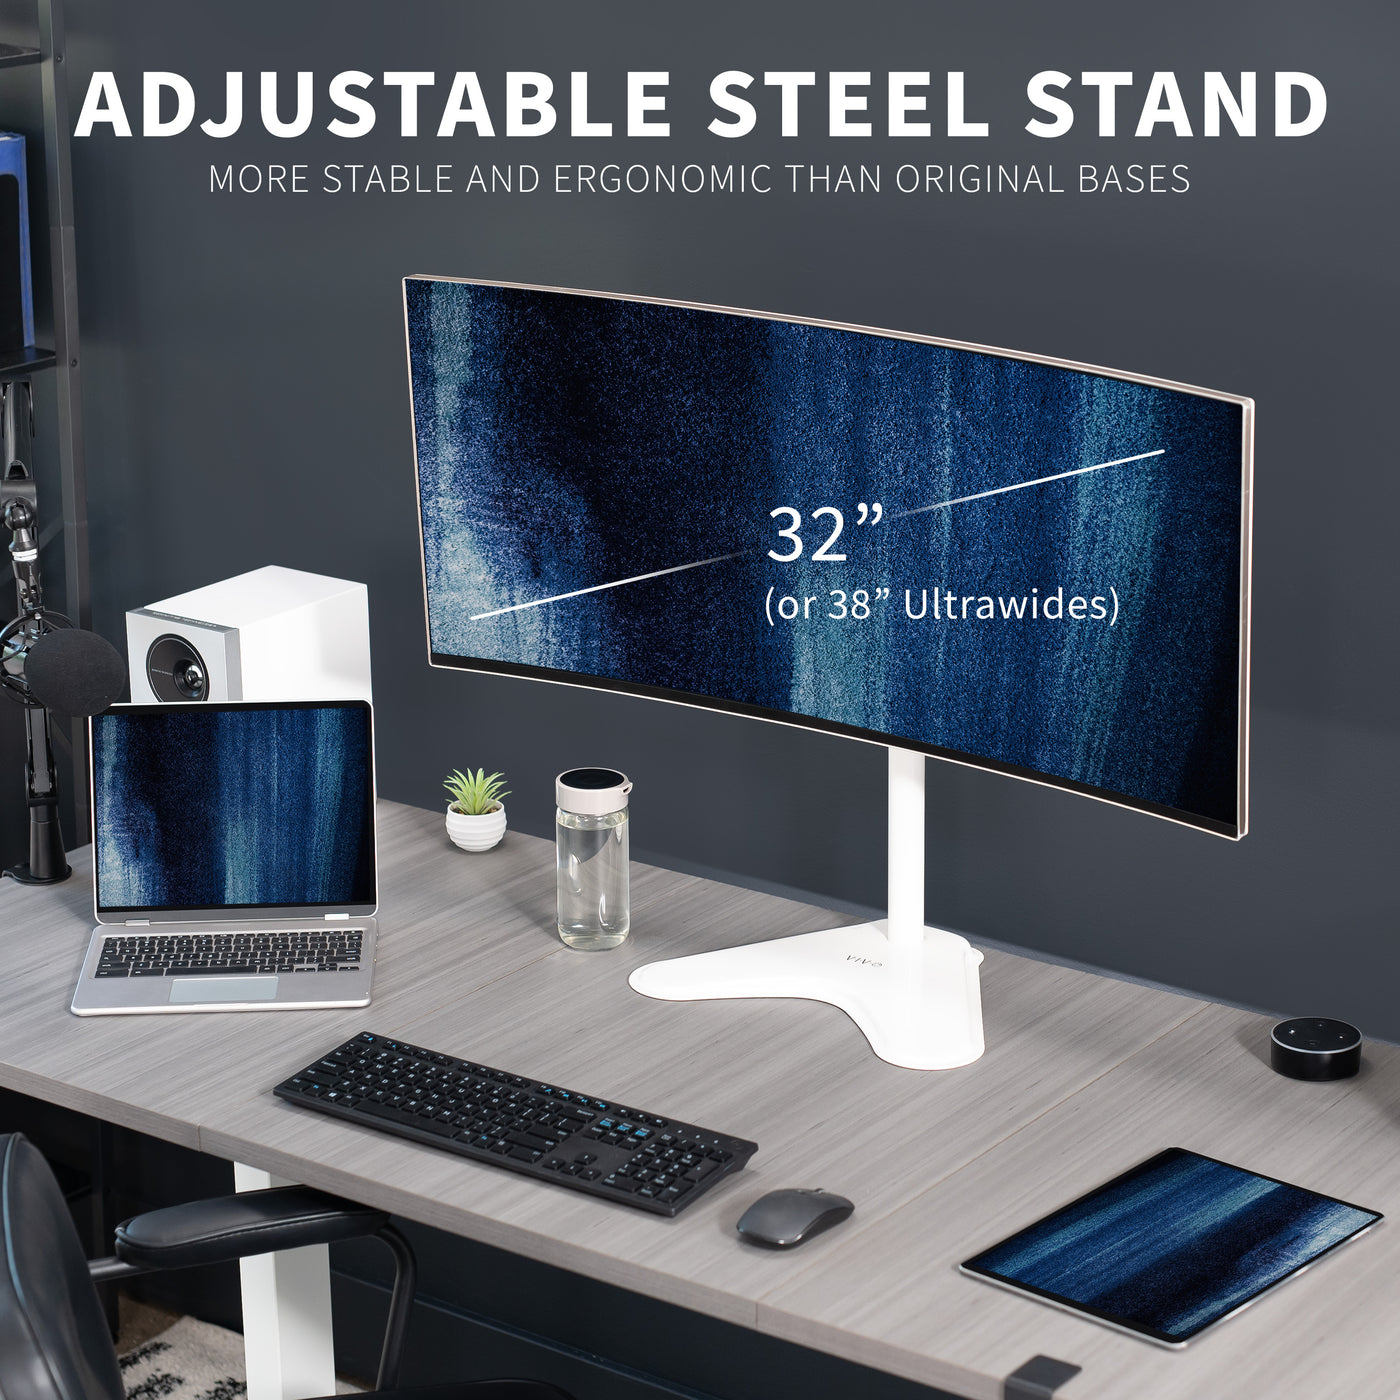 A height-adjustable monitor stands for better viewing.